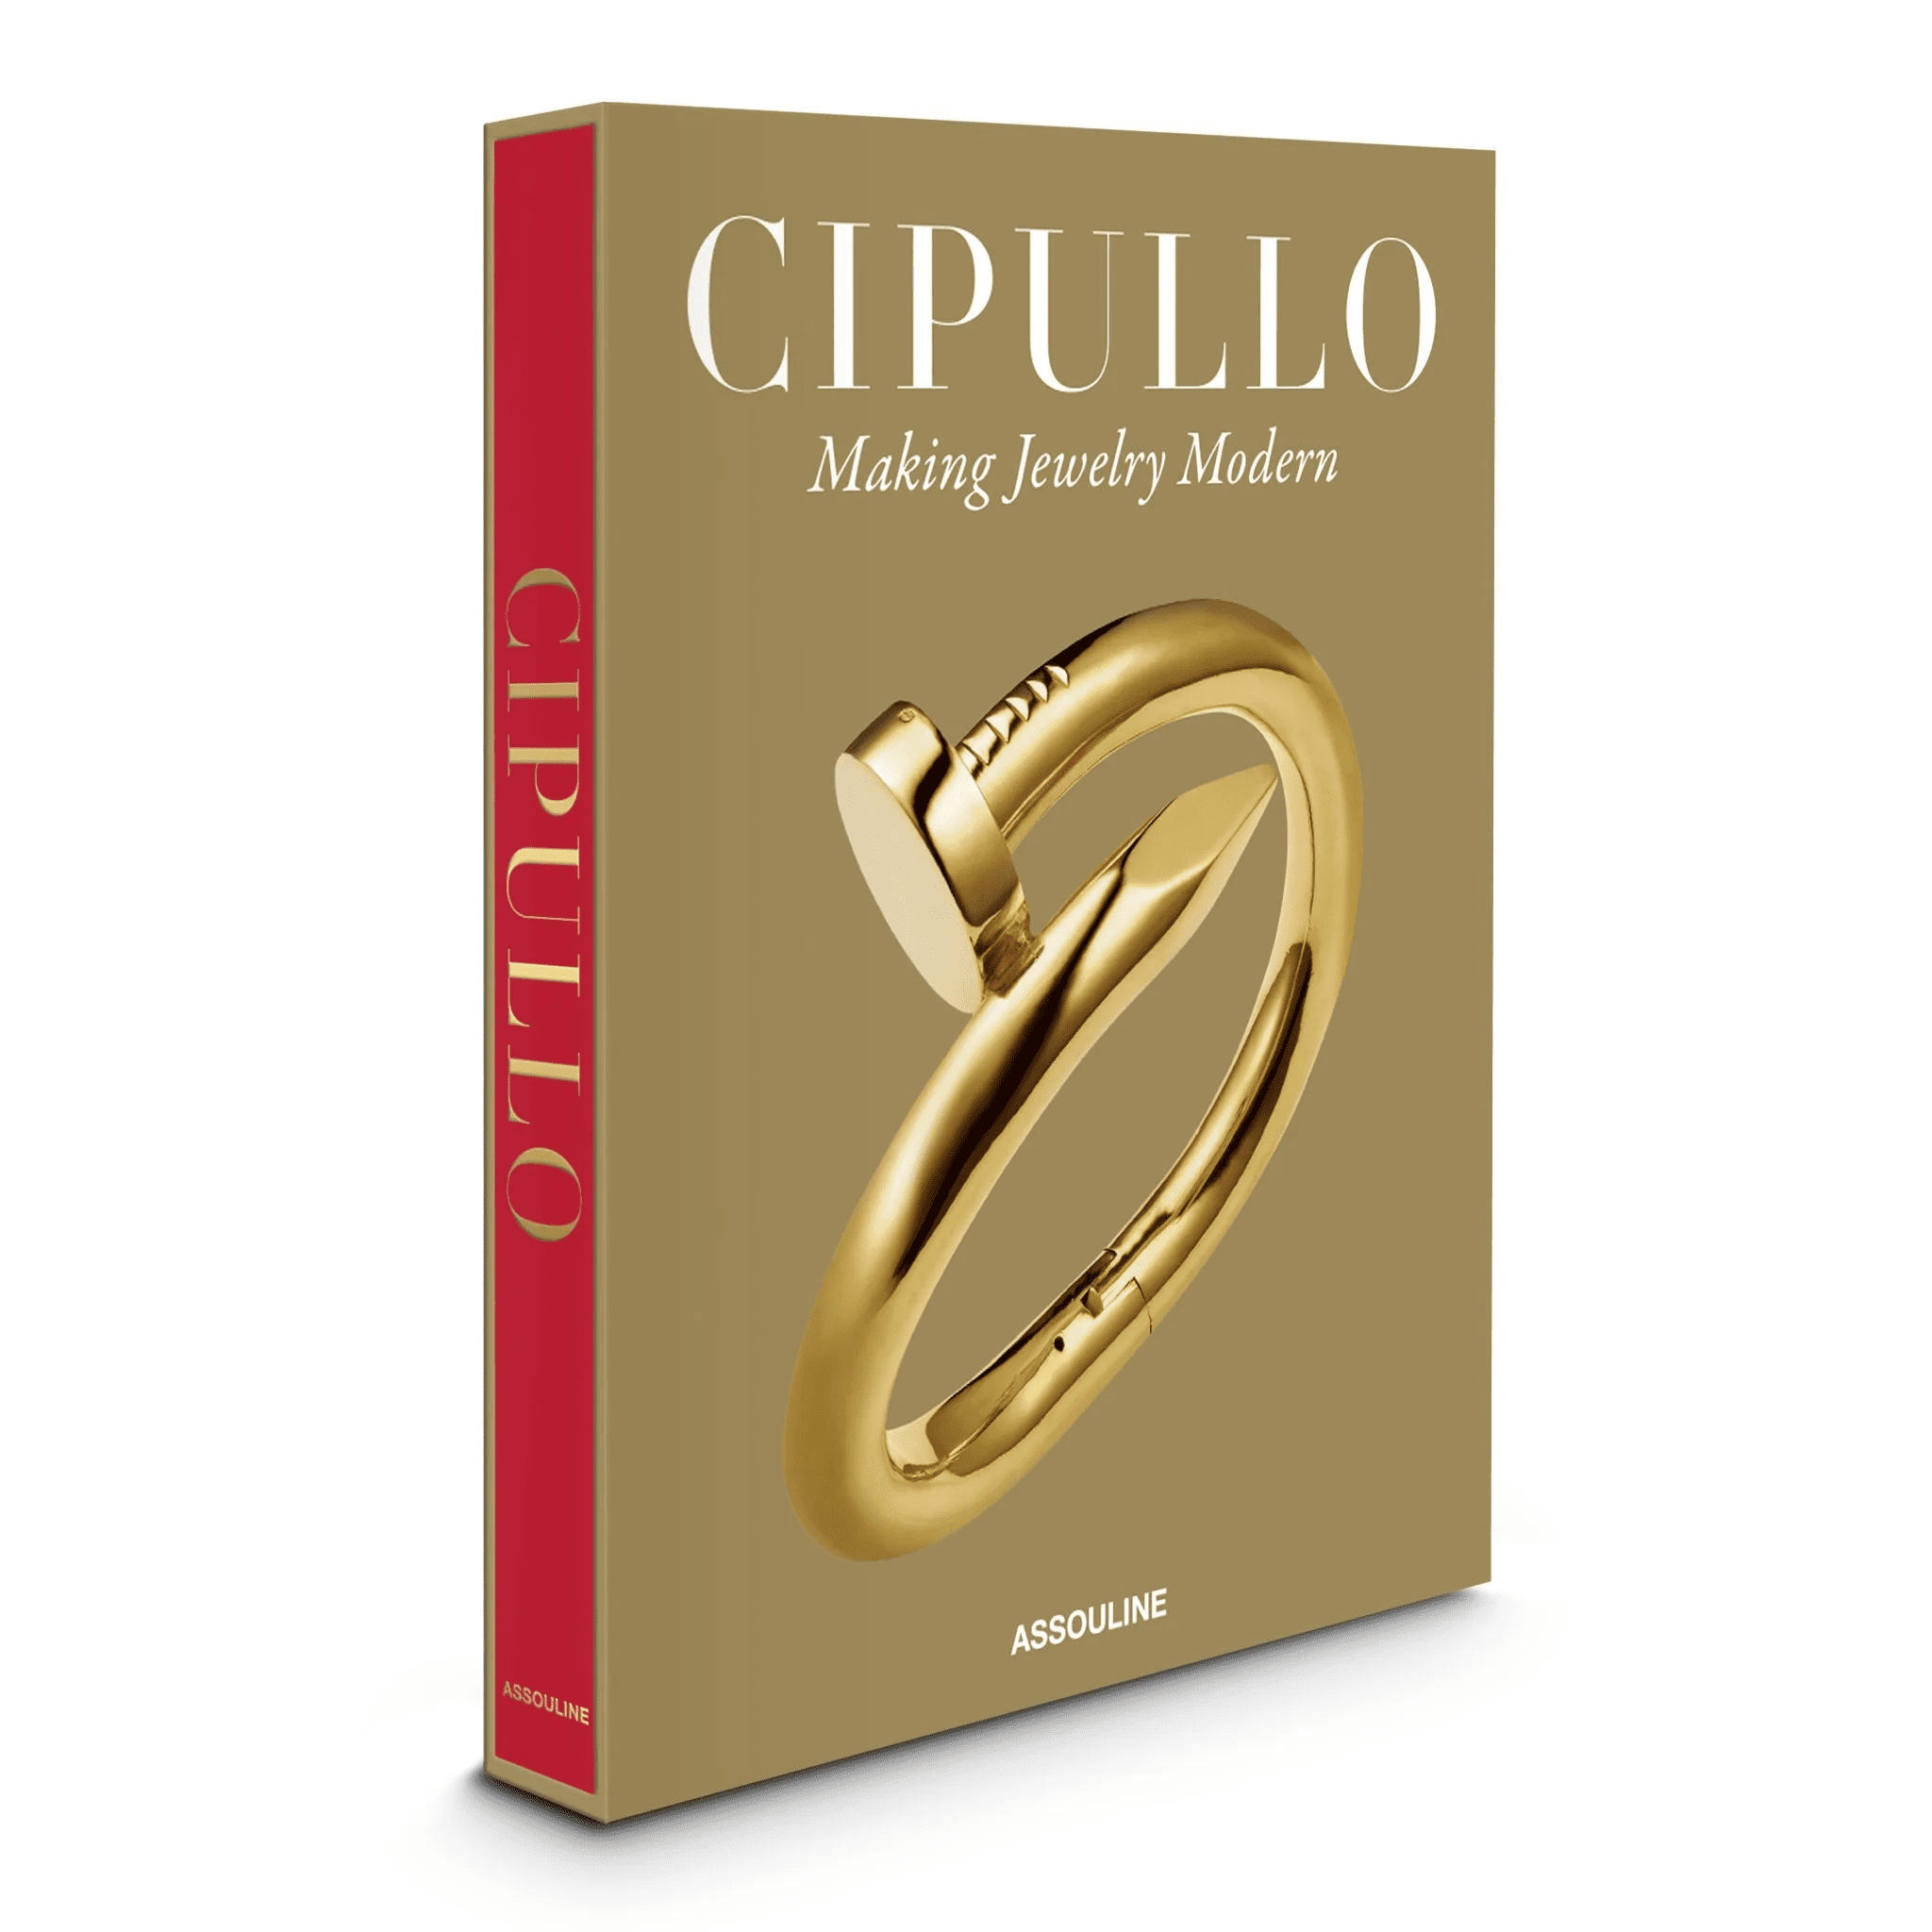 Cipullo:  The Man Who Made Jewlery Modern | Assouline | Iris Gifts & Décor